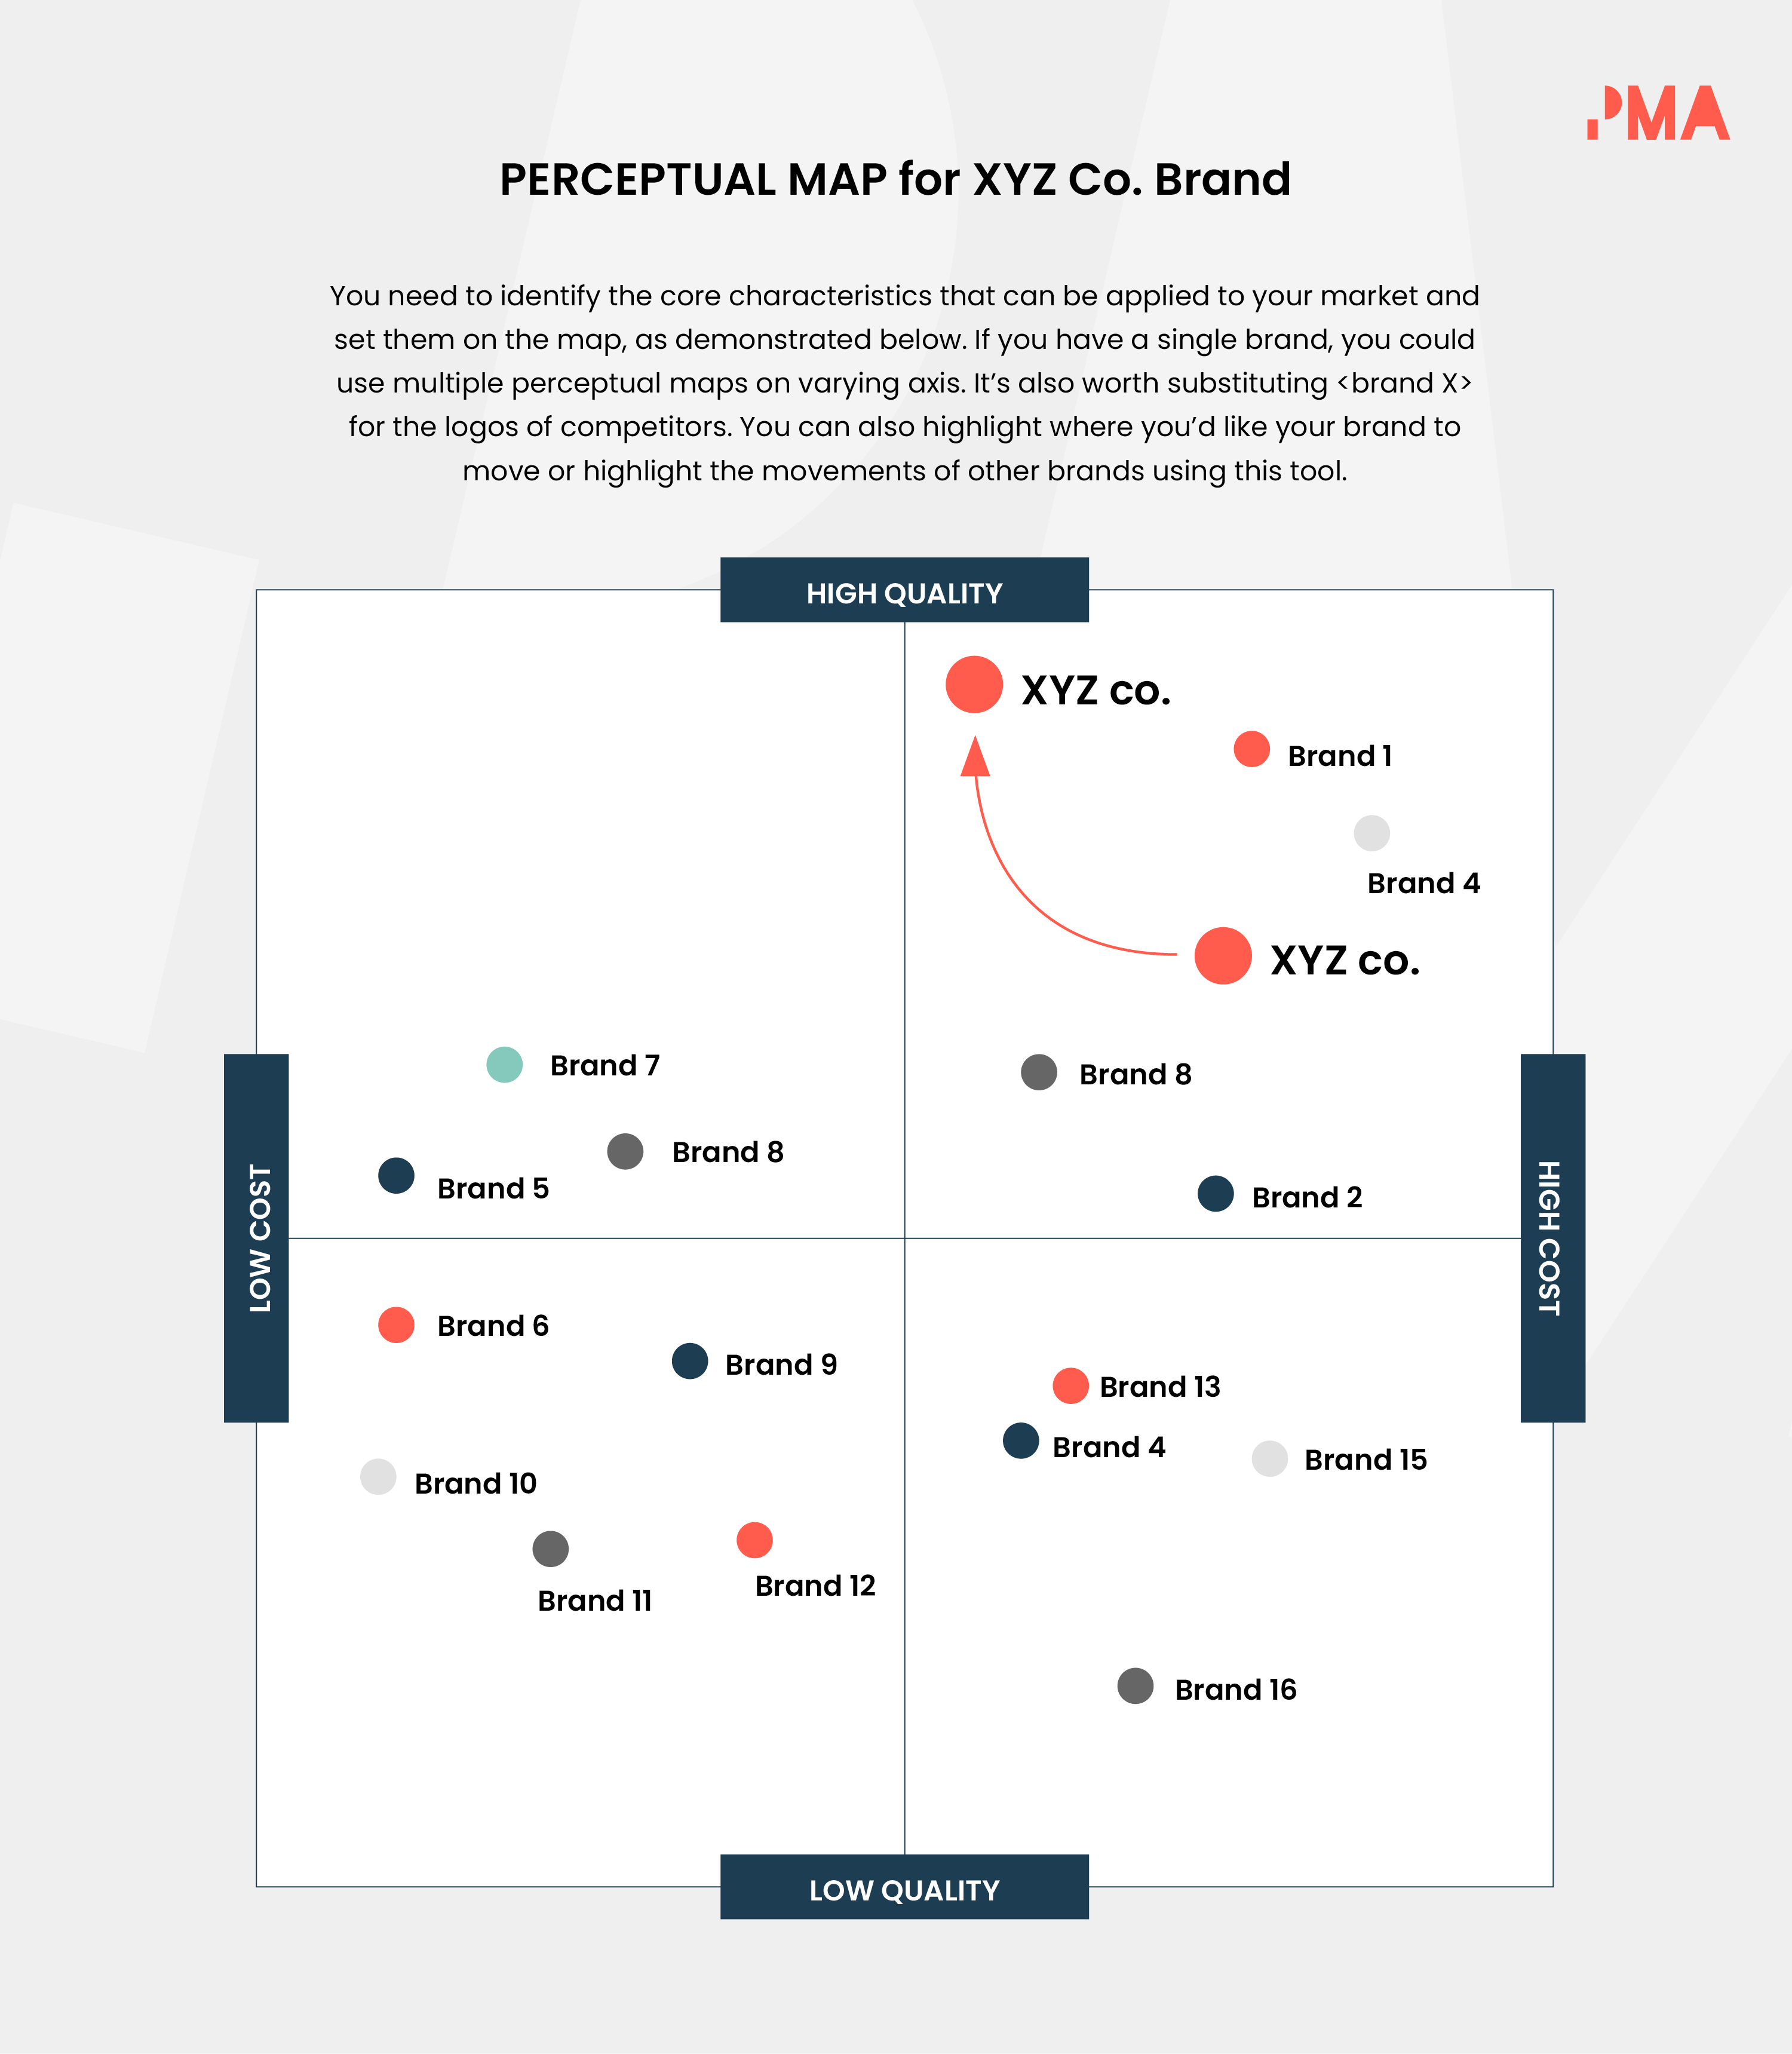 What is a perceptual product positioning map?